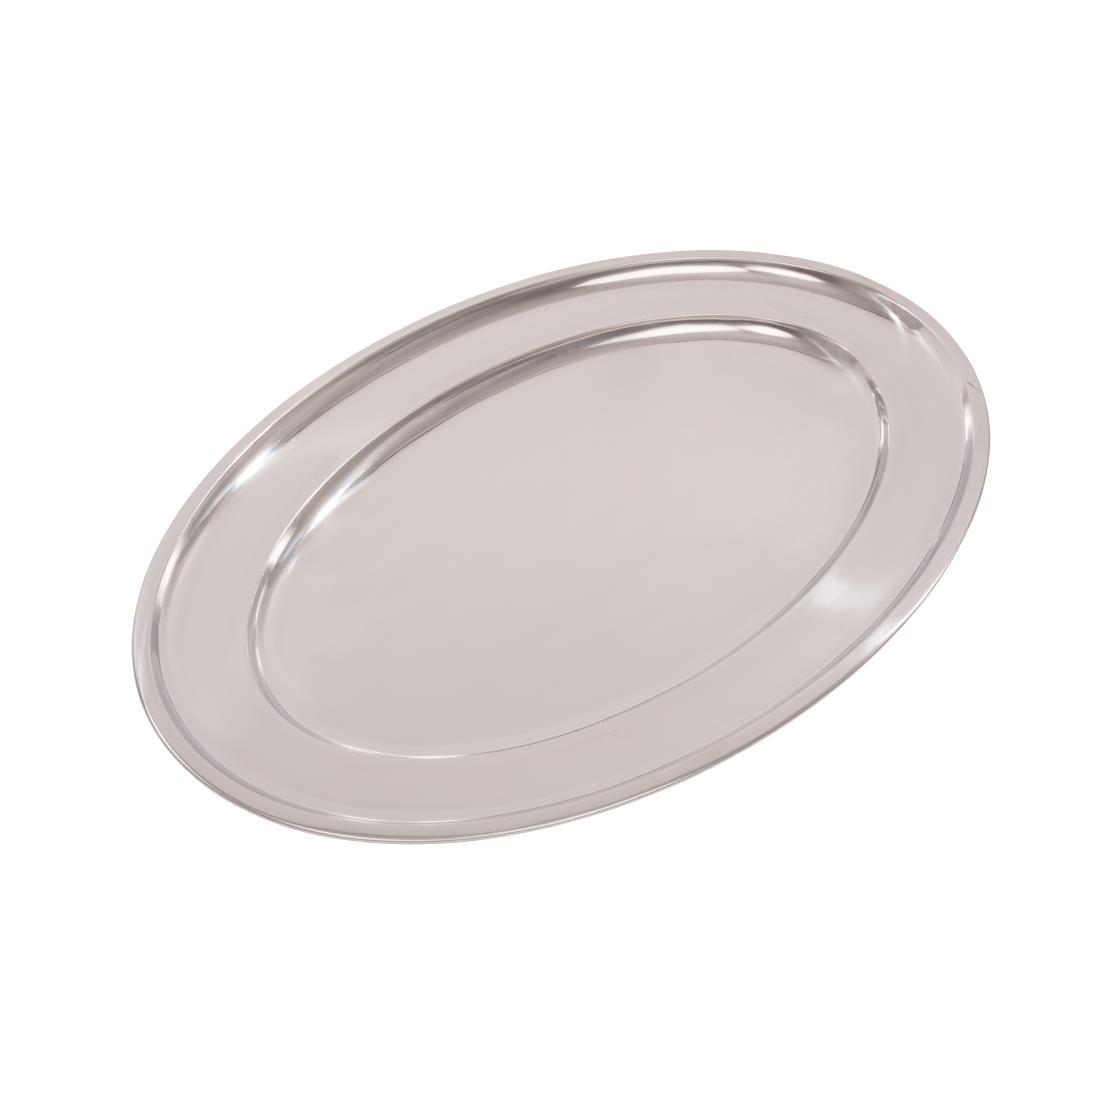 Olympia Stainless Steel Oval Serving Tray 605mm - K369  - 1